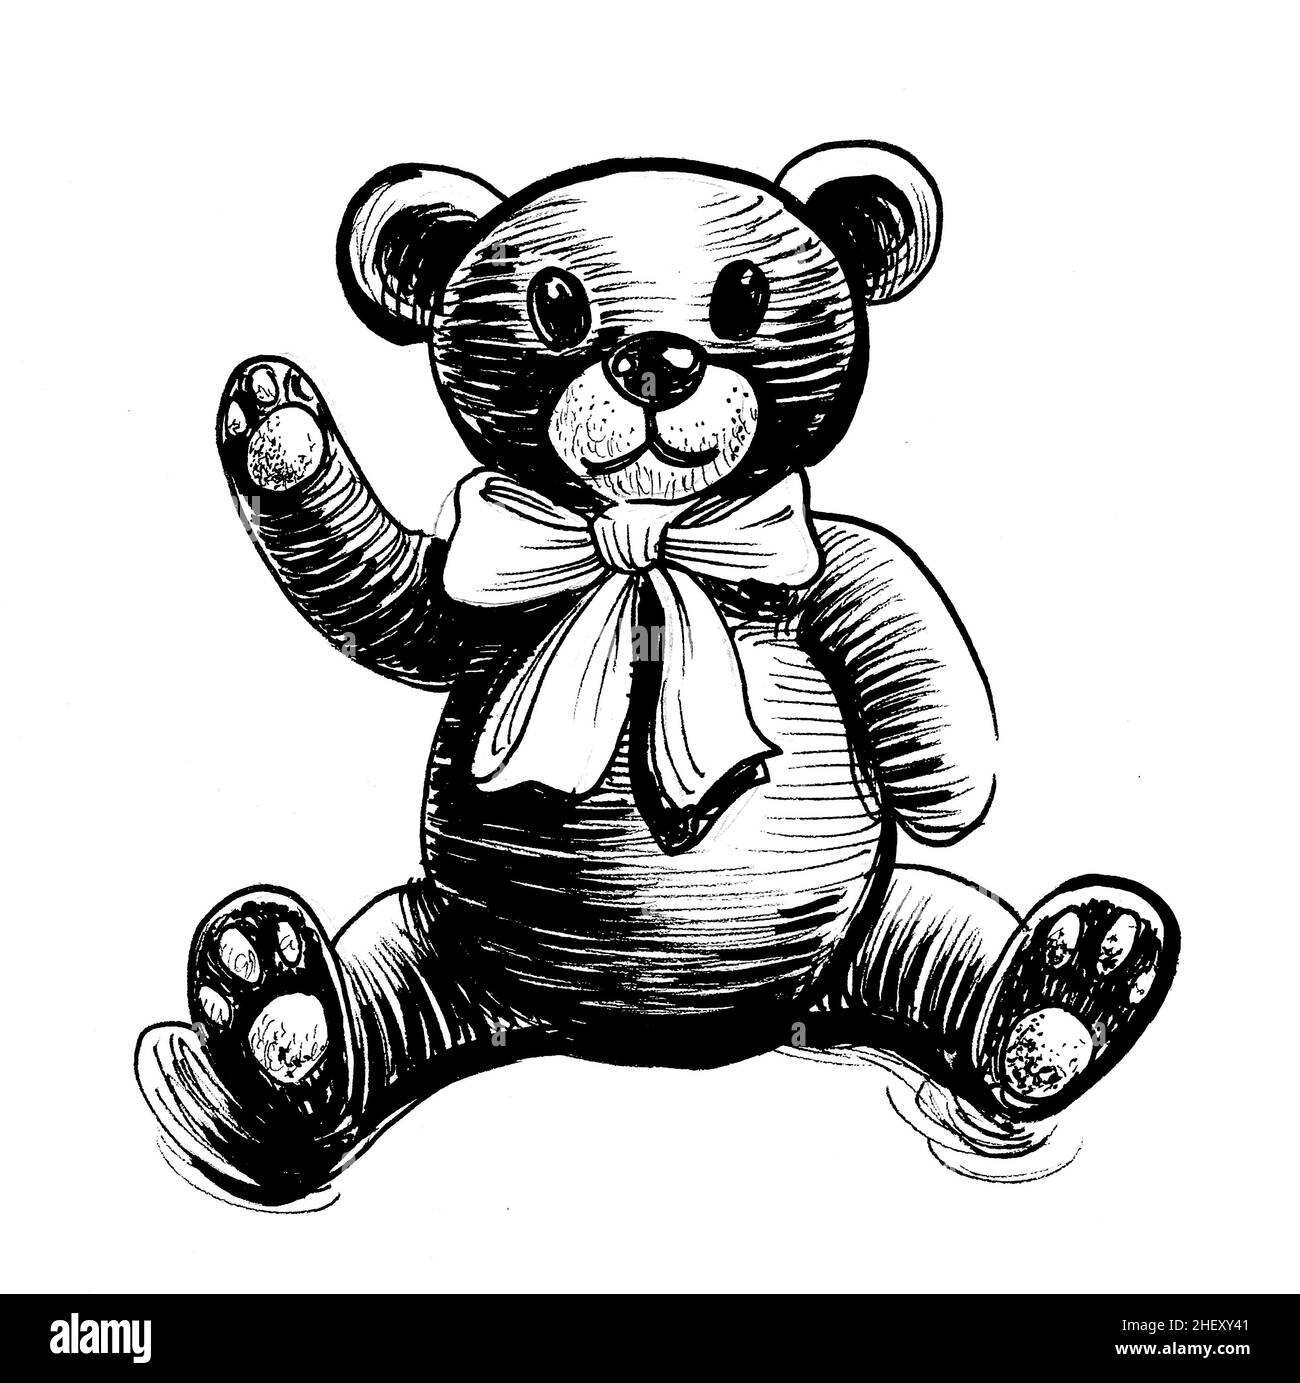 Sitting Teddy Bear toy. Ink black and white drawing Stock Photo